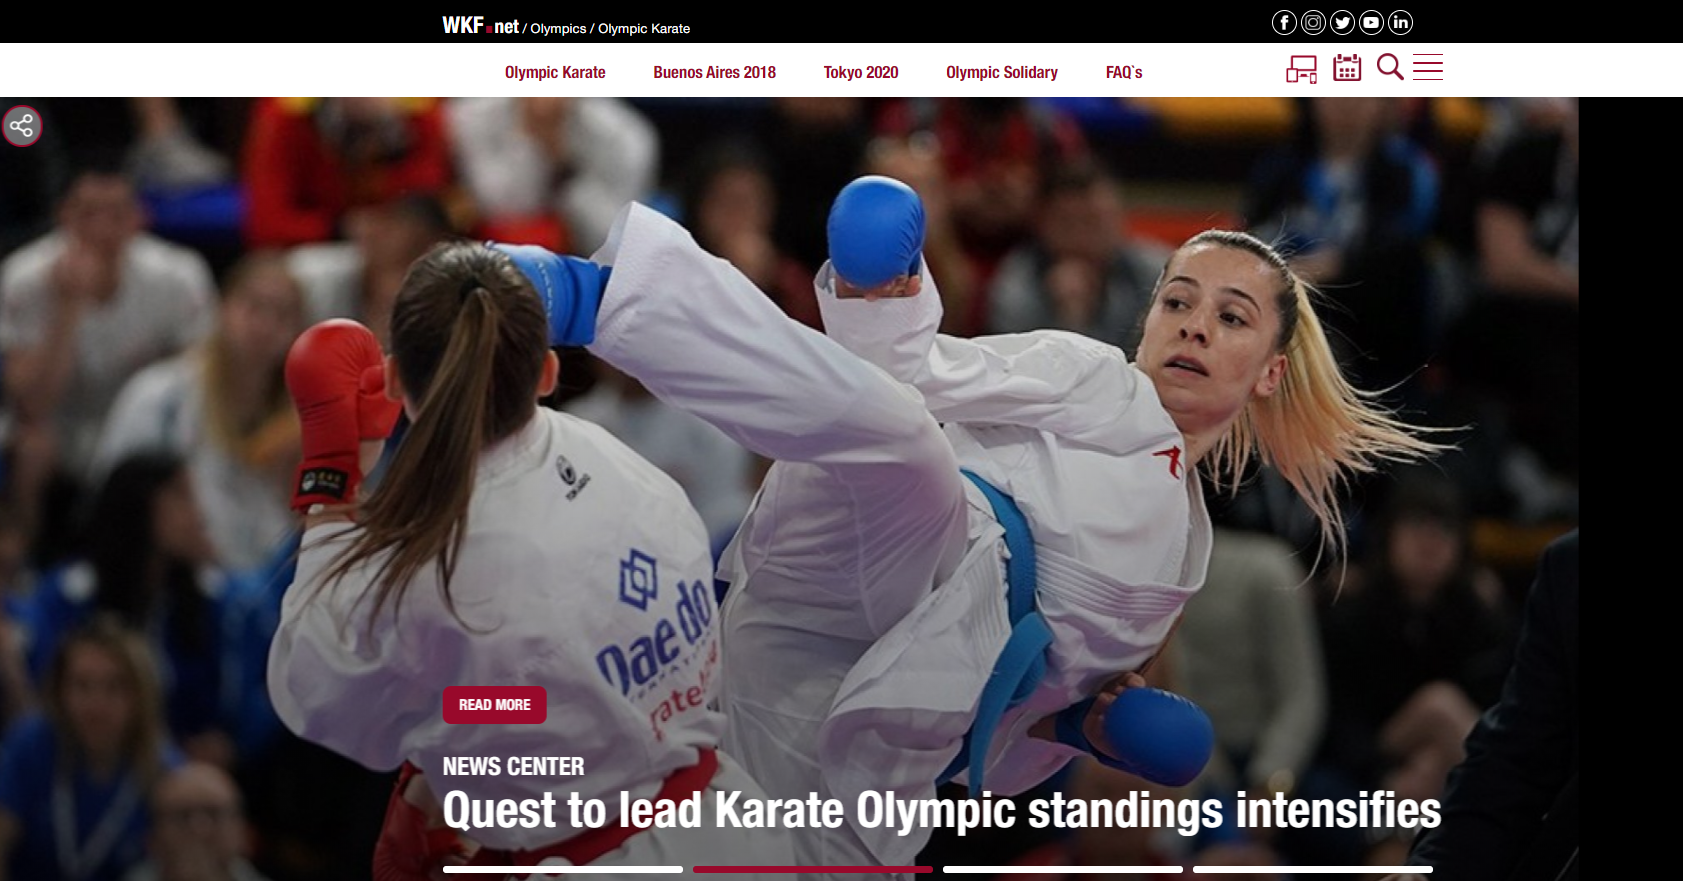 The website has launched as karate prepares for its Olympic debut at Tokyo 2020 ©WKF